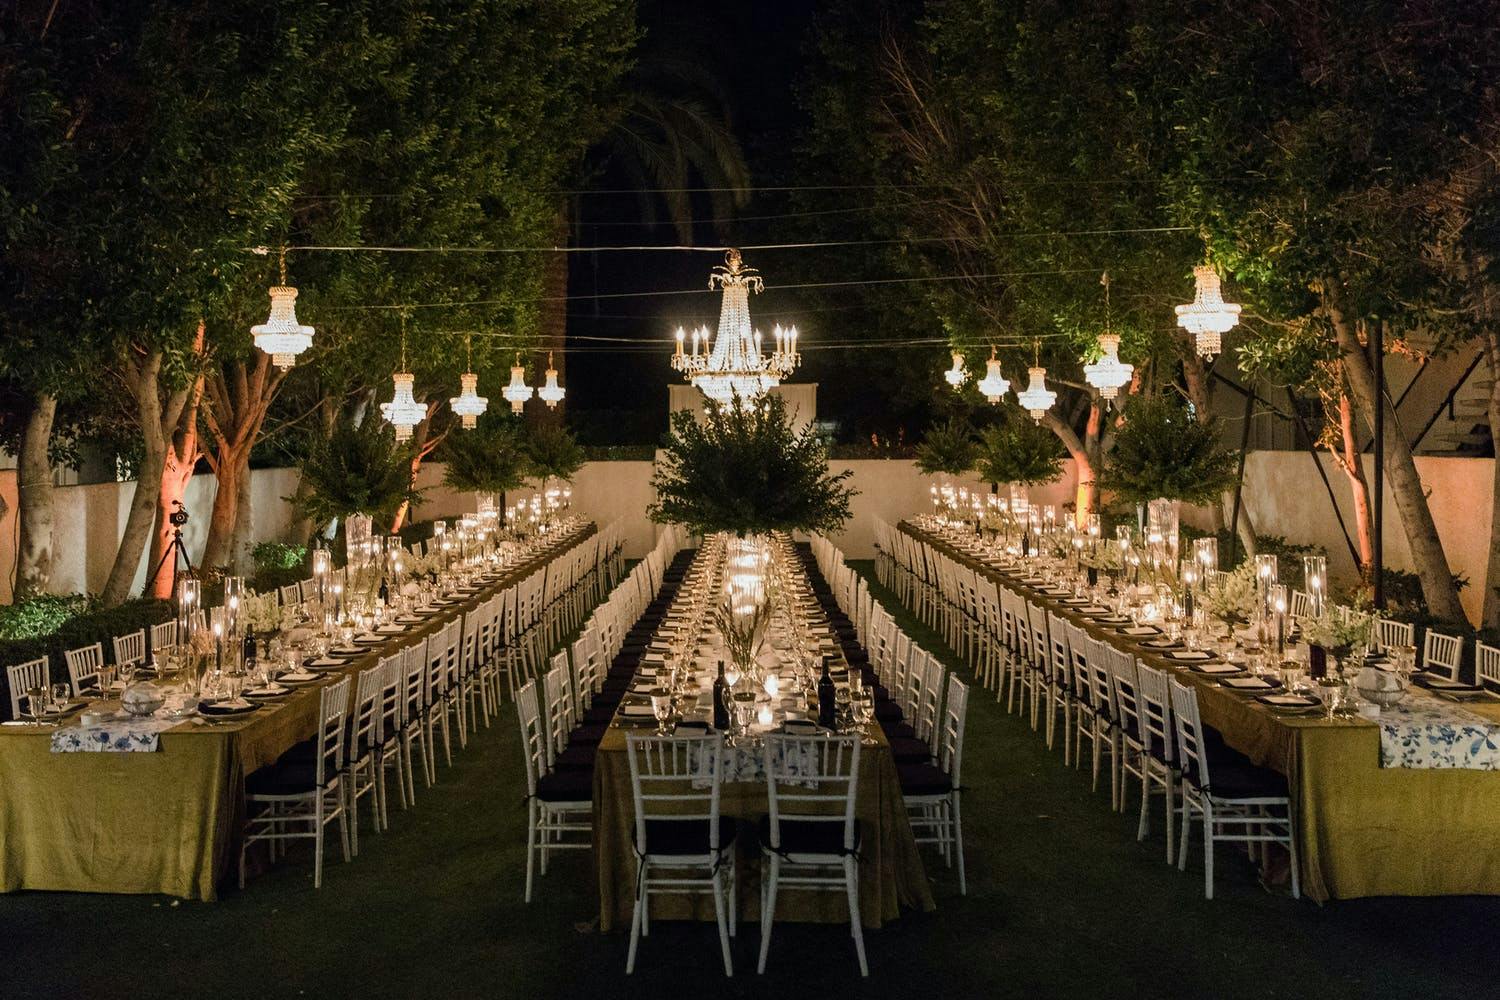 Nighttime, Outdoor Wedding Reception With Three Long Tables in Yellow Linen and Suspended Chandeliers with Greenery | PartySlate